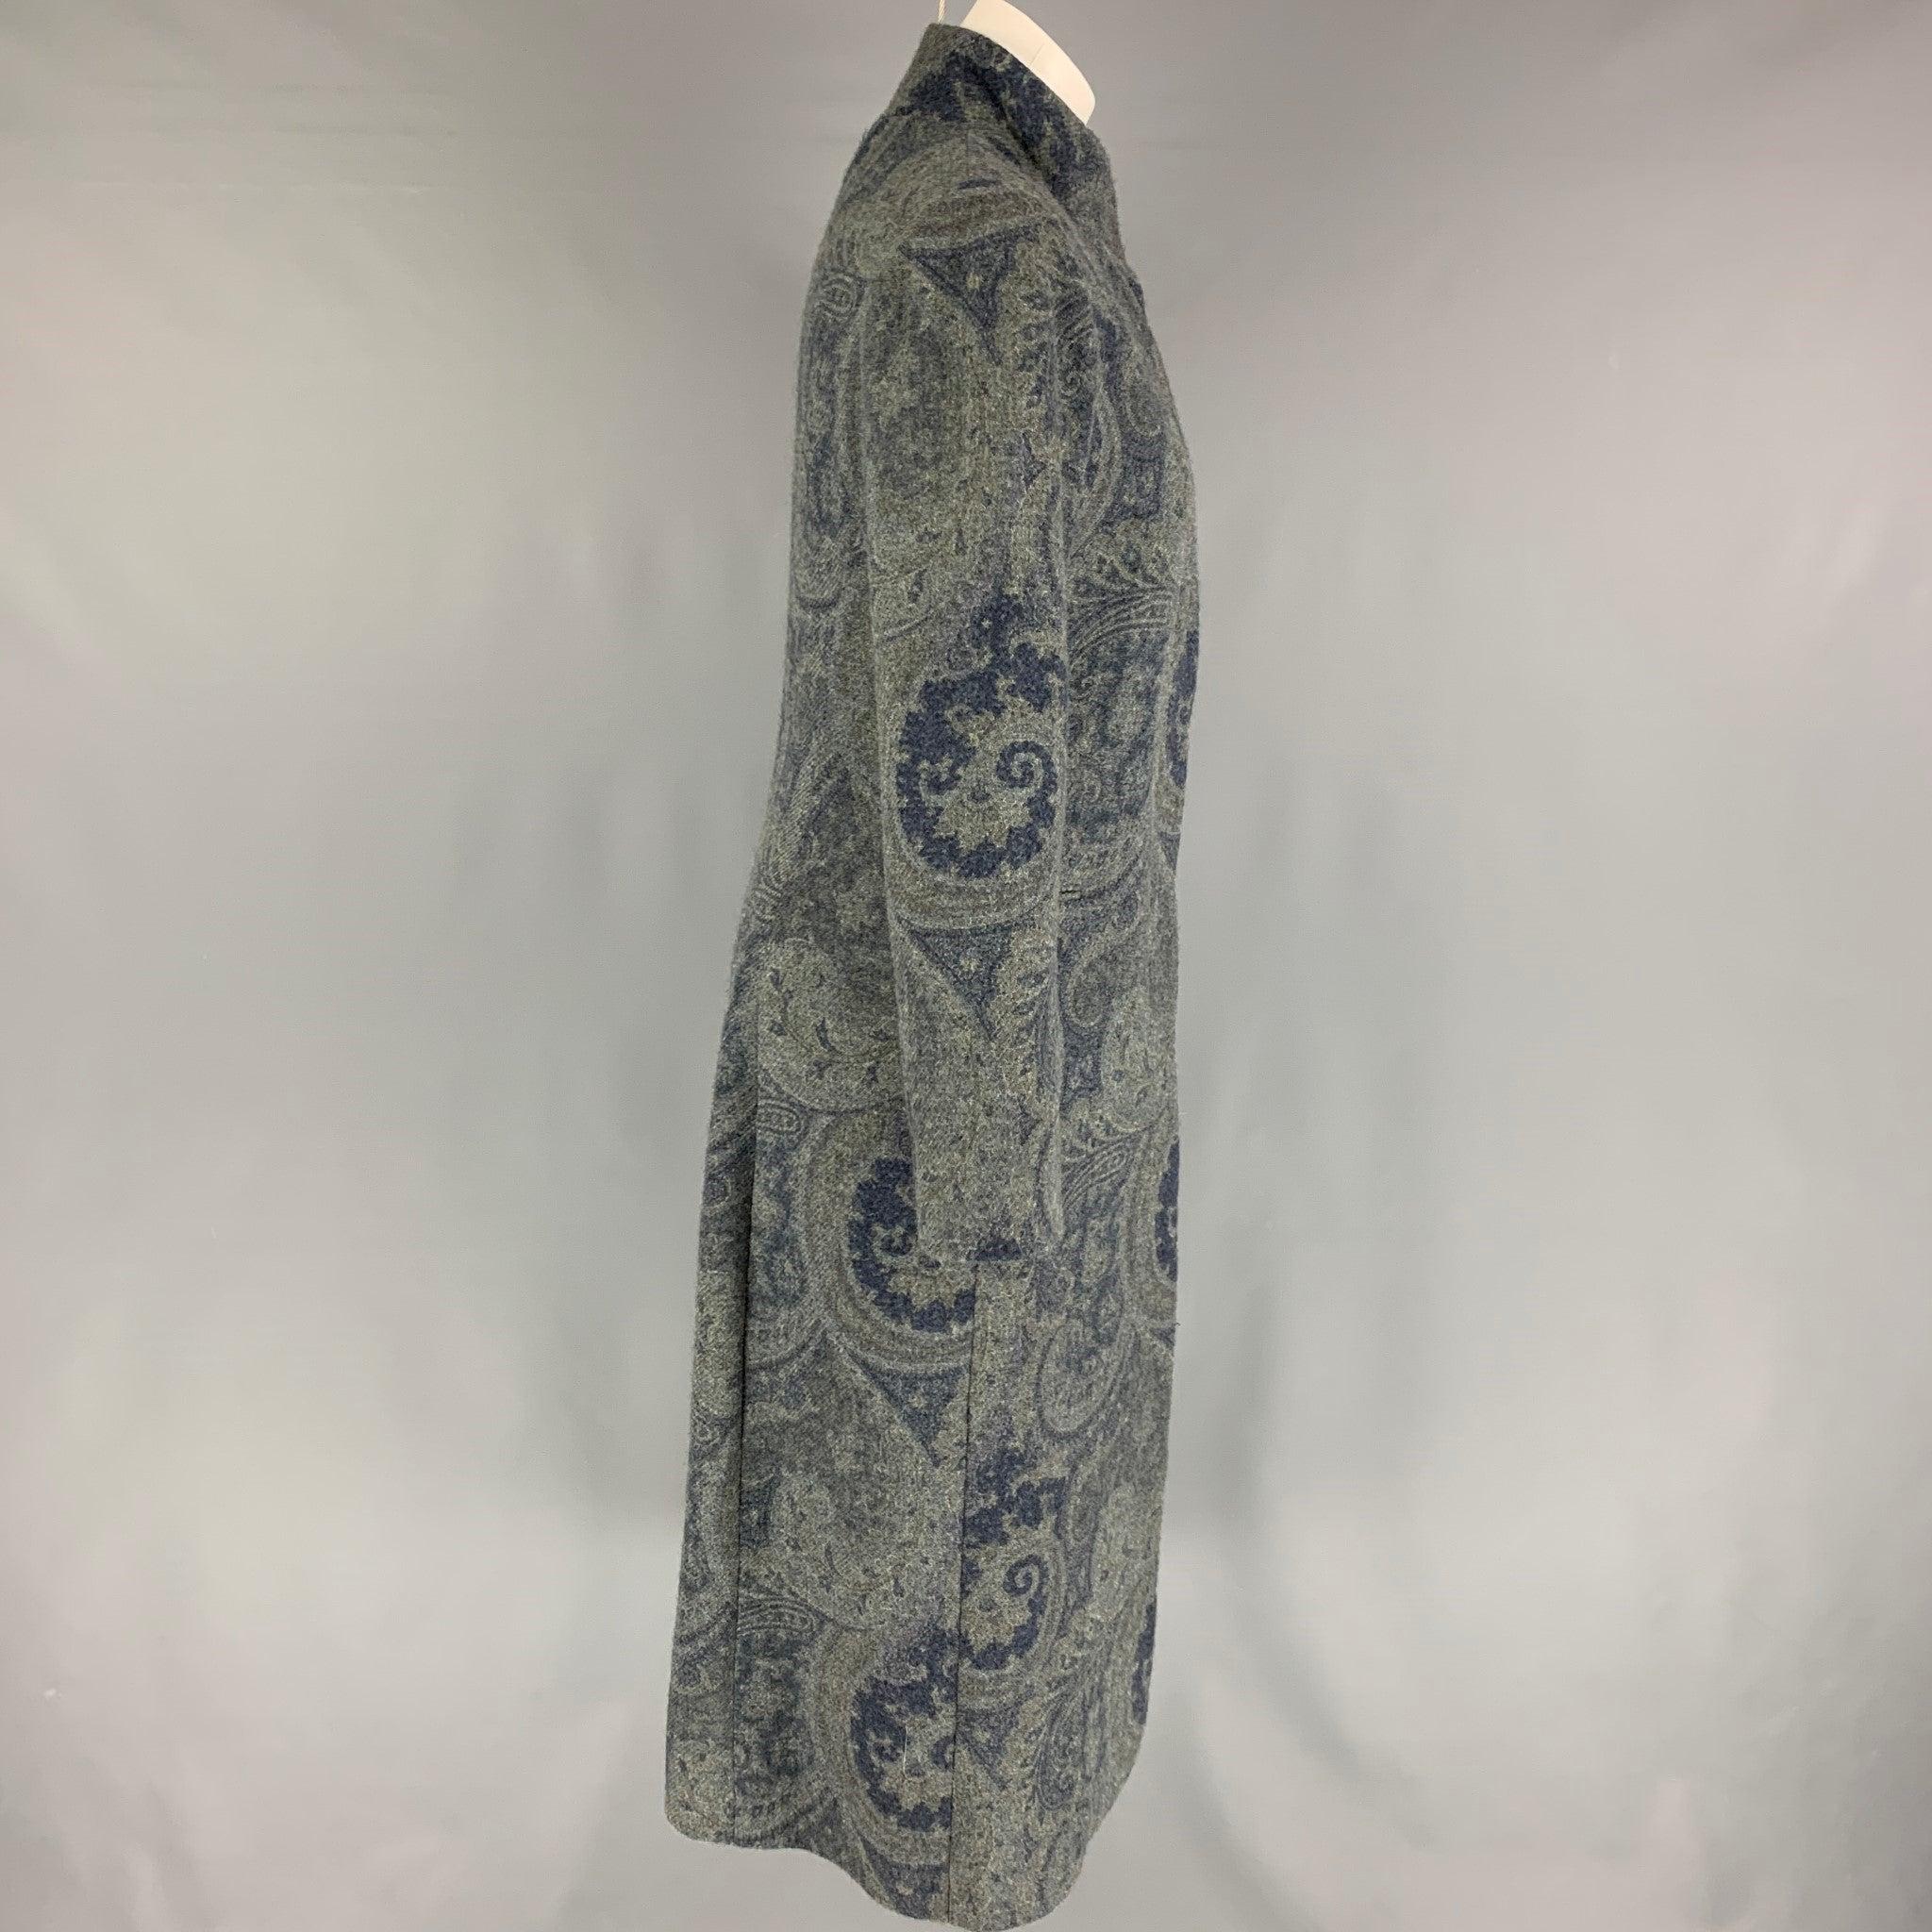 RALPH LAUREN 'Black Label' coat comes in a gre & blue paisley wool with a full liner featuring a stand up collar, slit pockets, and a hidden placket closure. Made in USA. Very Good Pre-Owned Condition. 

Marked:   Size tag removed.  

Measurements: